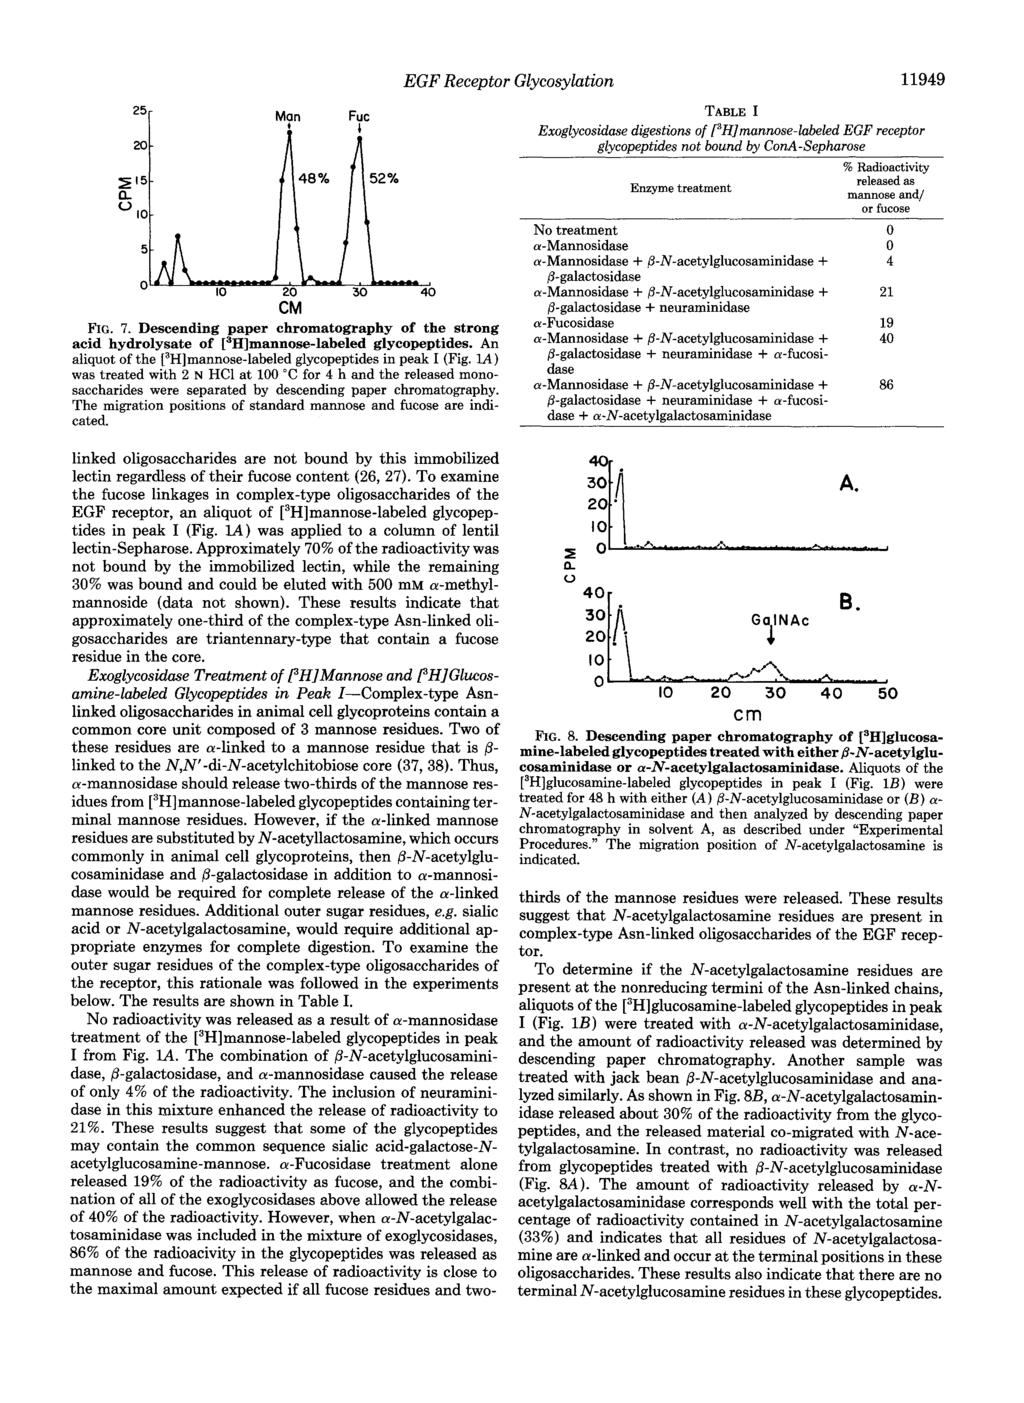 25r Man Fuc A ir CM FIG. 7. Descendingpaperchromatography of thestrong acid hydrolysate of [3H]mannose-labeled glycopeptides. An aliquot of the [3H]mannose-labeled glycopeptides in peak I (Fig.